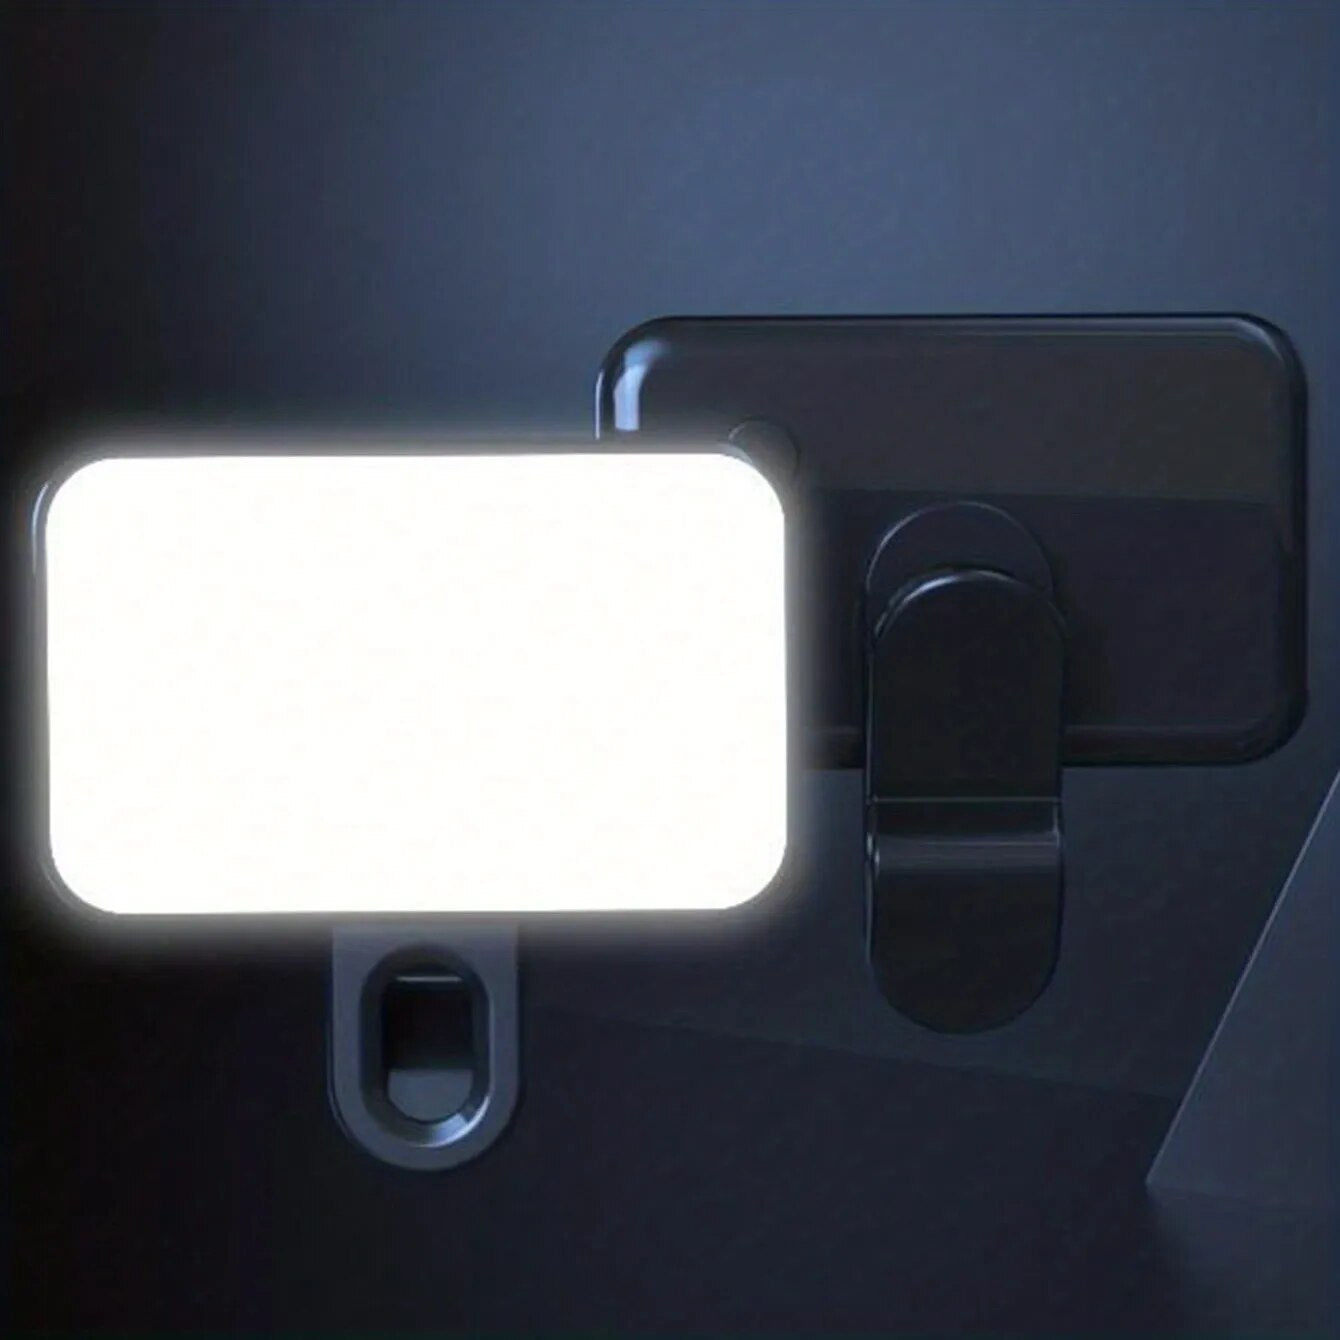 Portable Mini Selfie Fill Light Rechargeable 3 Modes Adjustable Brightness Clip on for Mobile Phone Computer Fill Light - Orvis Collection